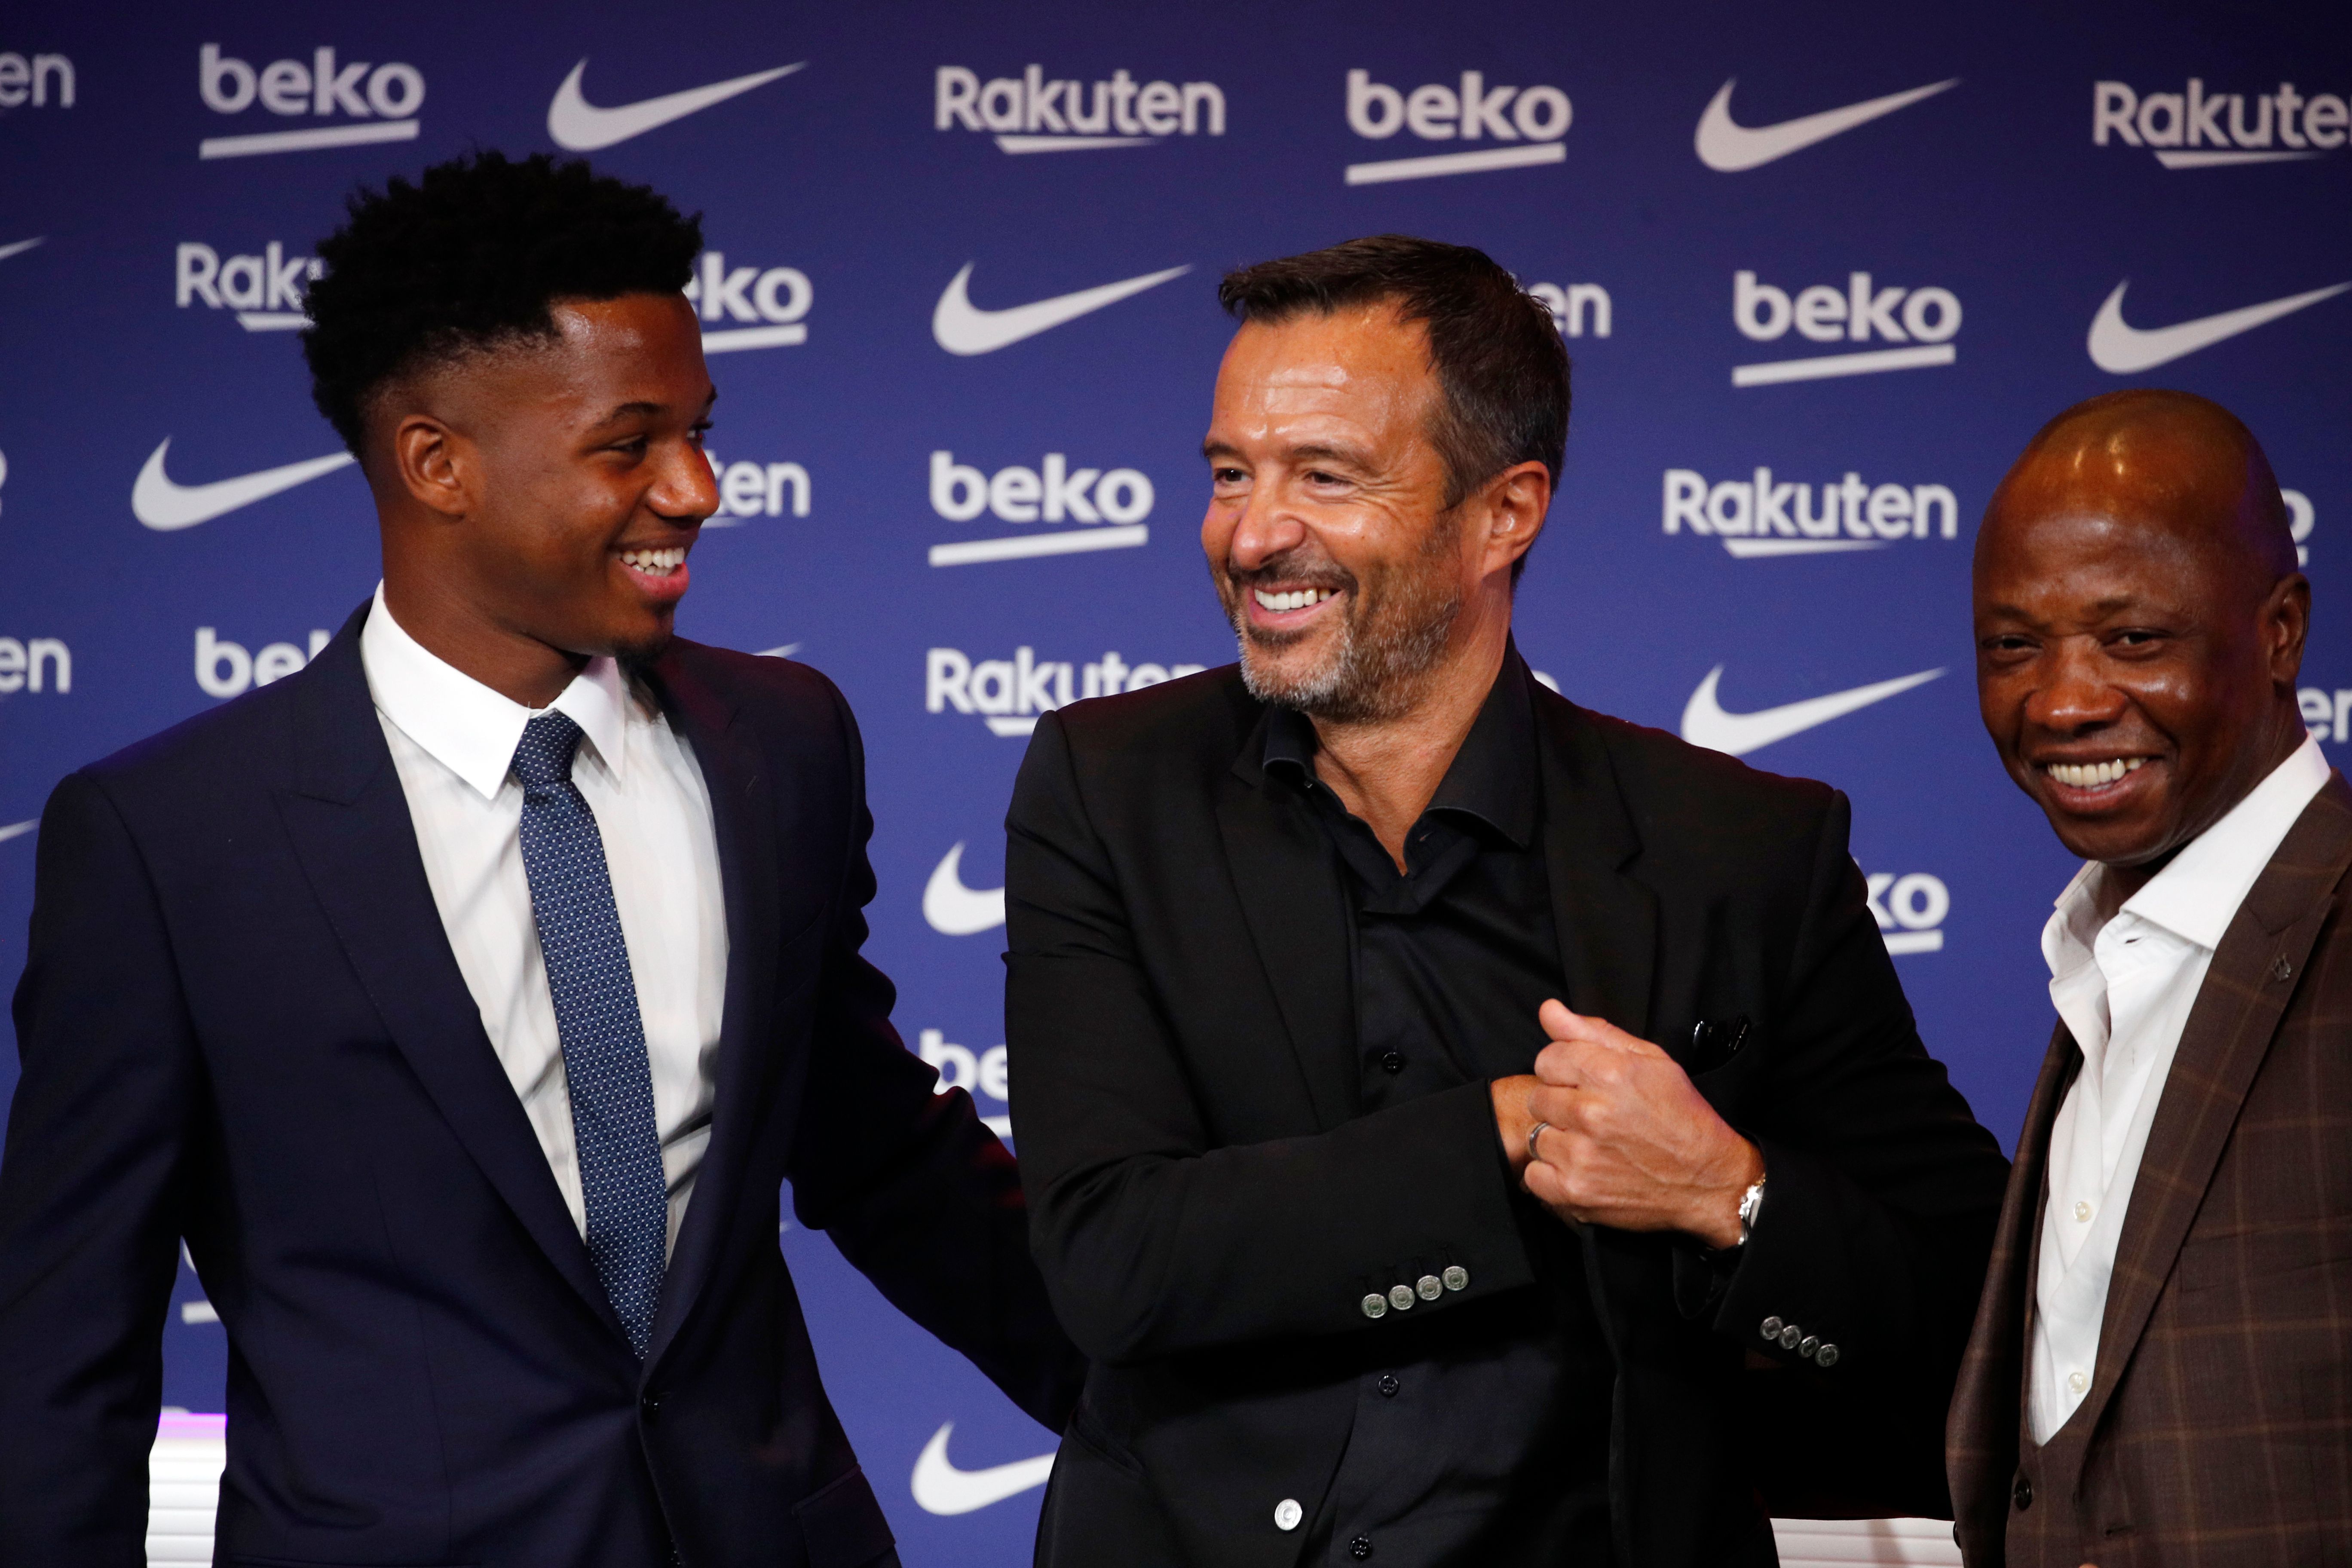 Ansu Fati and his agent gleam with pride as the Barcelona winger renews his contract with the Spanish club.